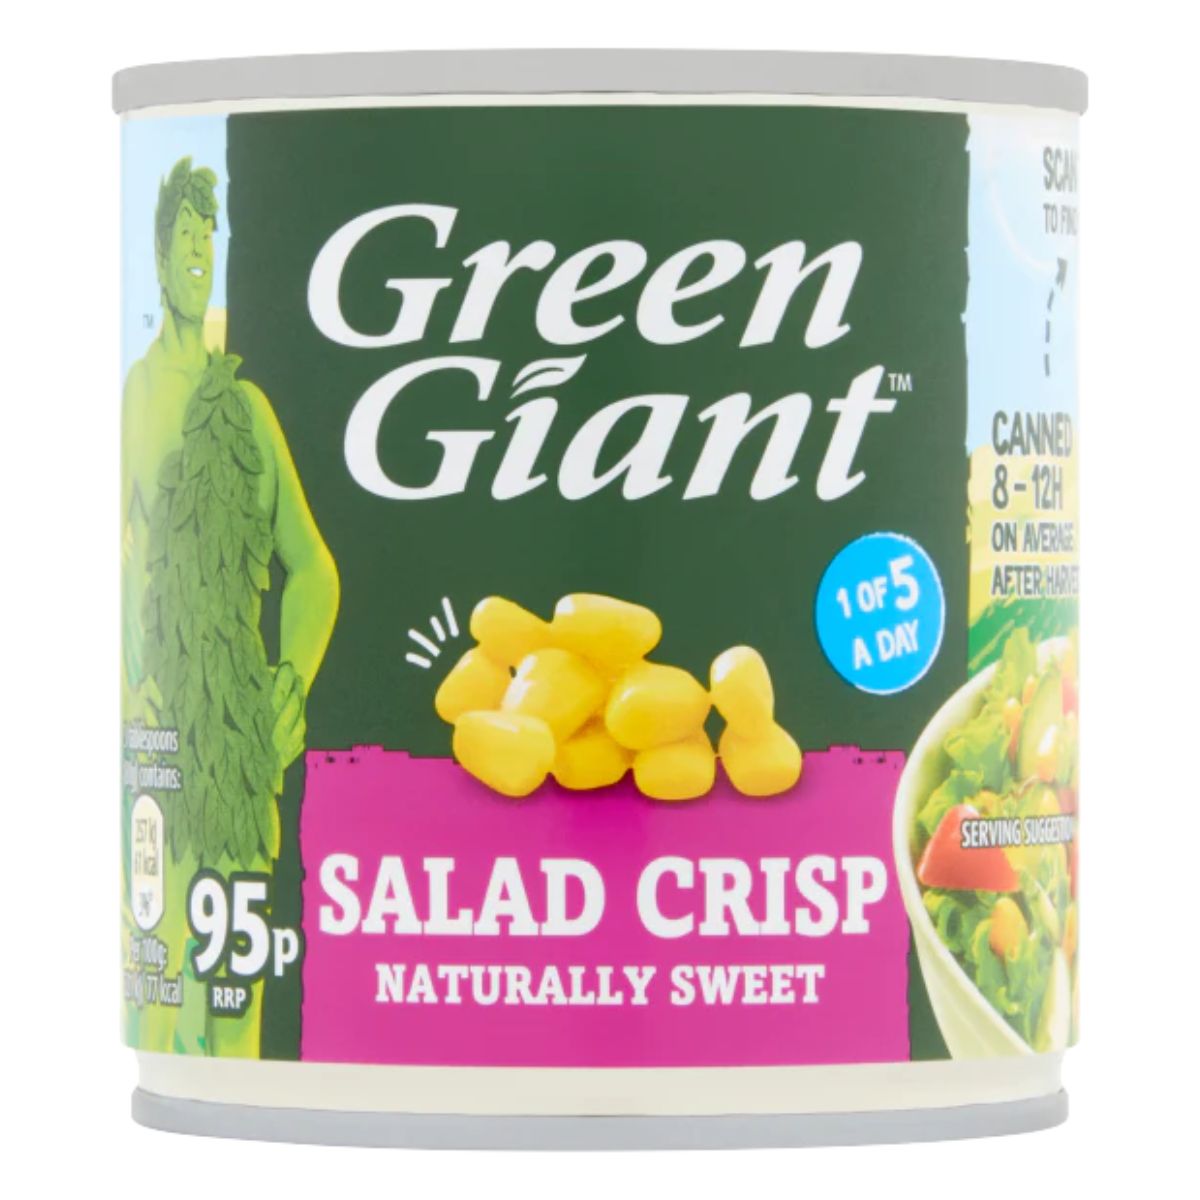 A can of Green Giant - Salad Crisp Sweetcorn - 160g.